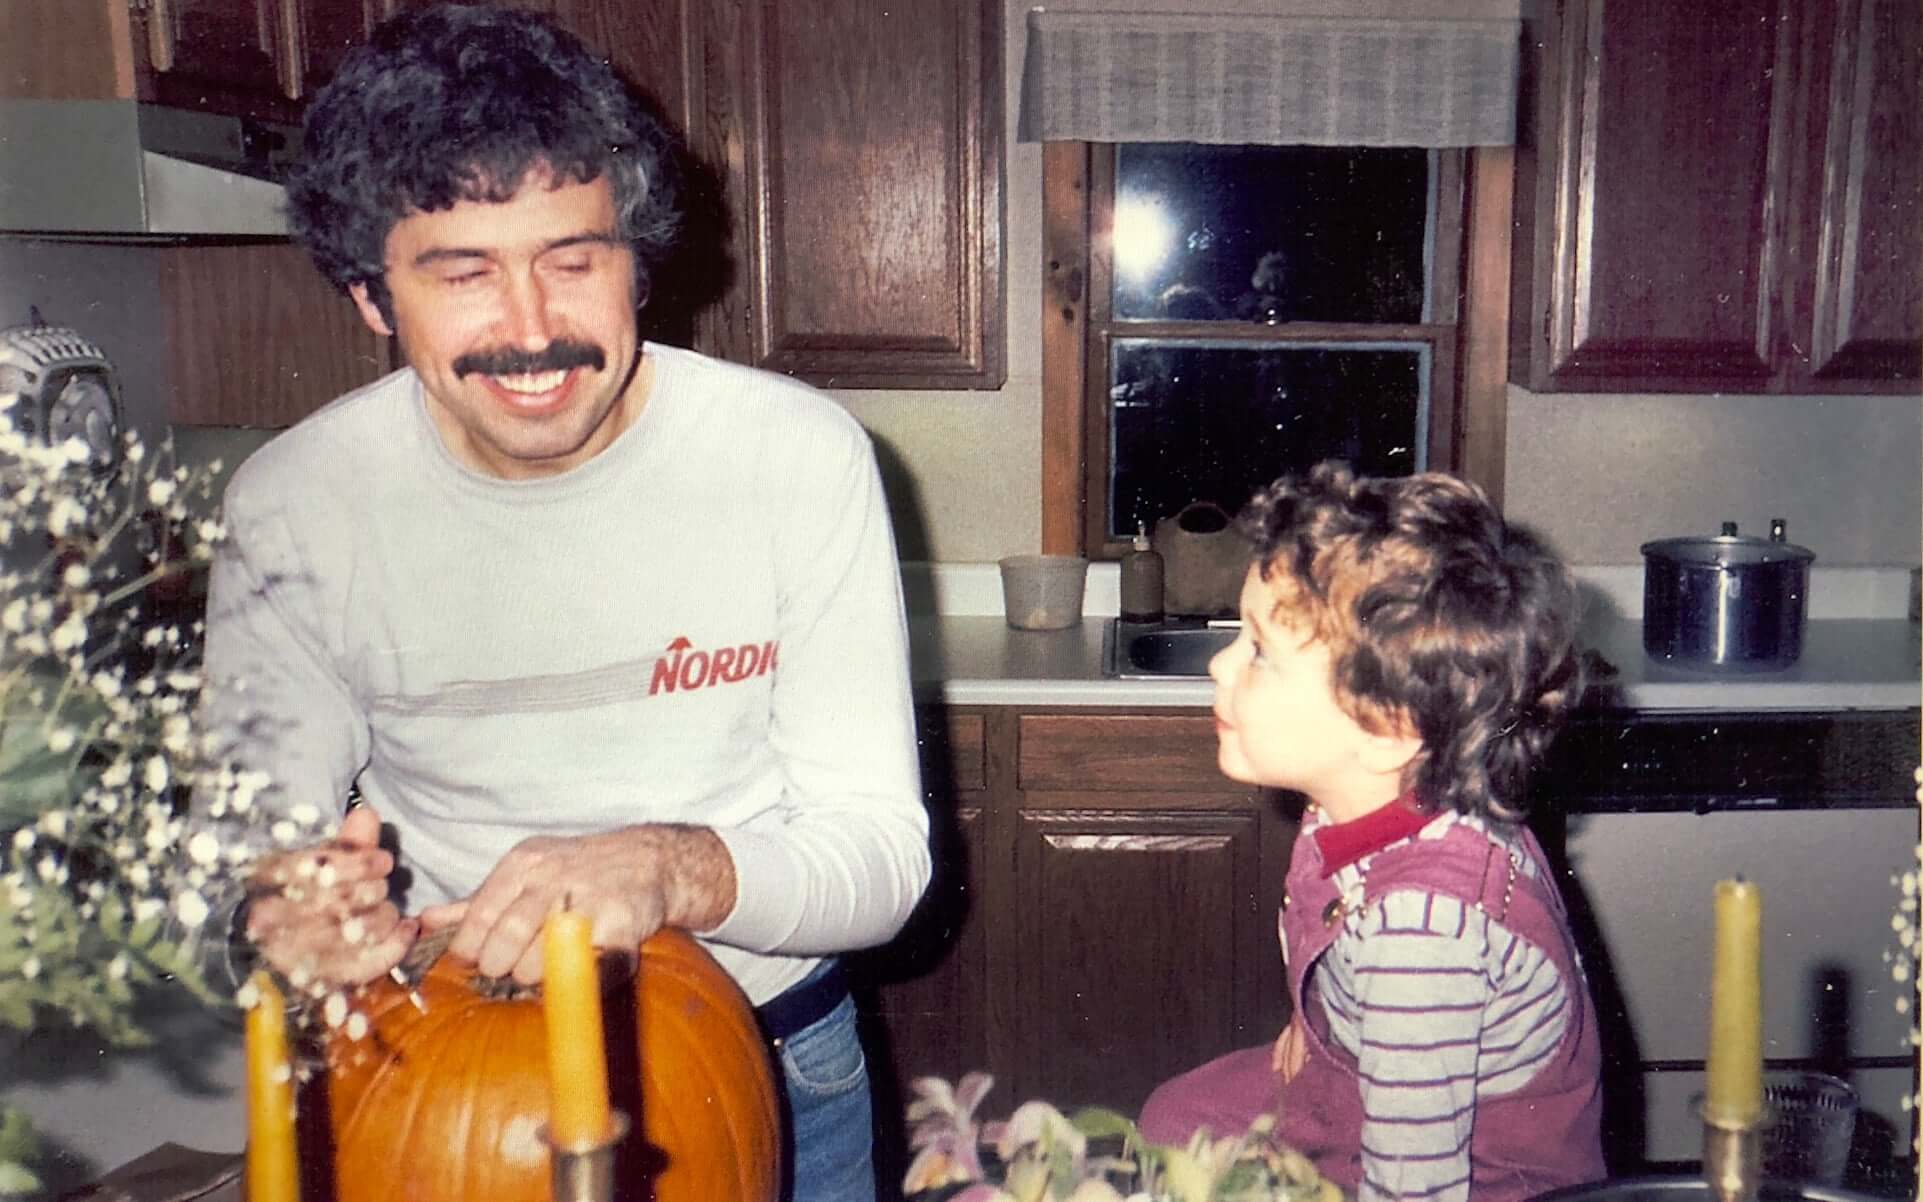 Old family photo showing Robert Politi smiling and carving a pumpkin while his son Nick watches on